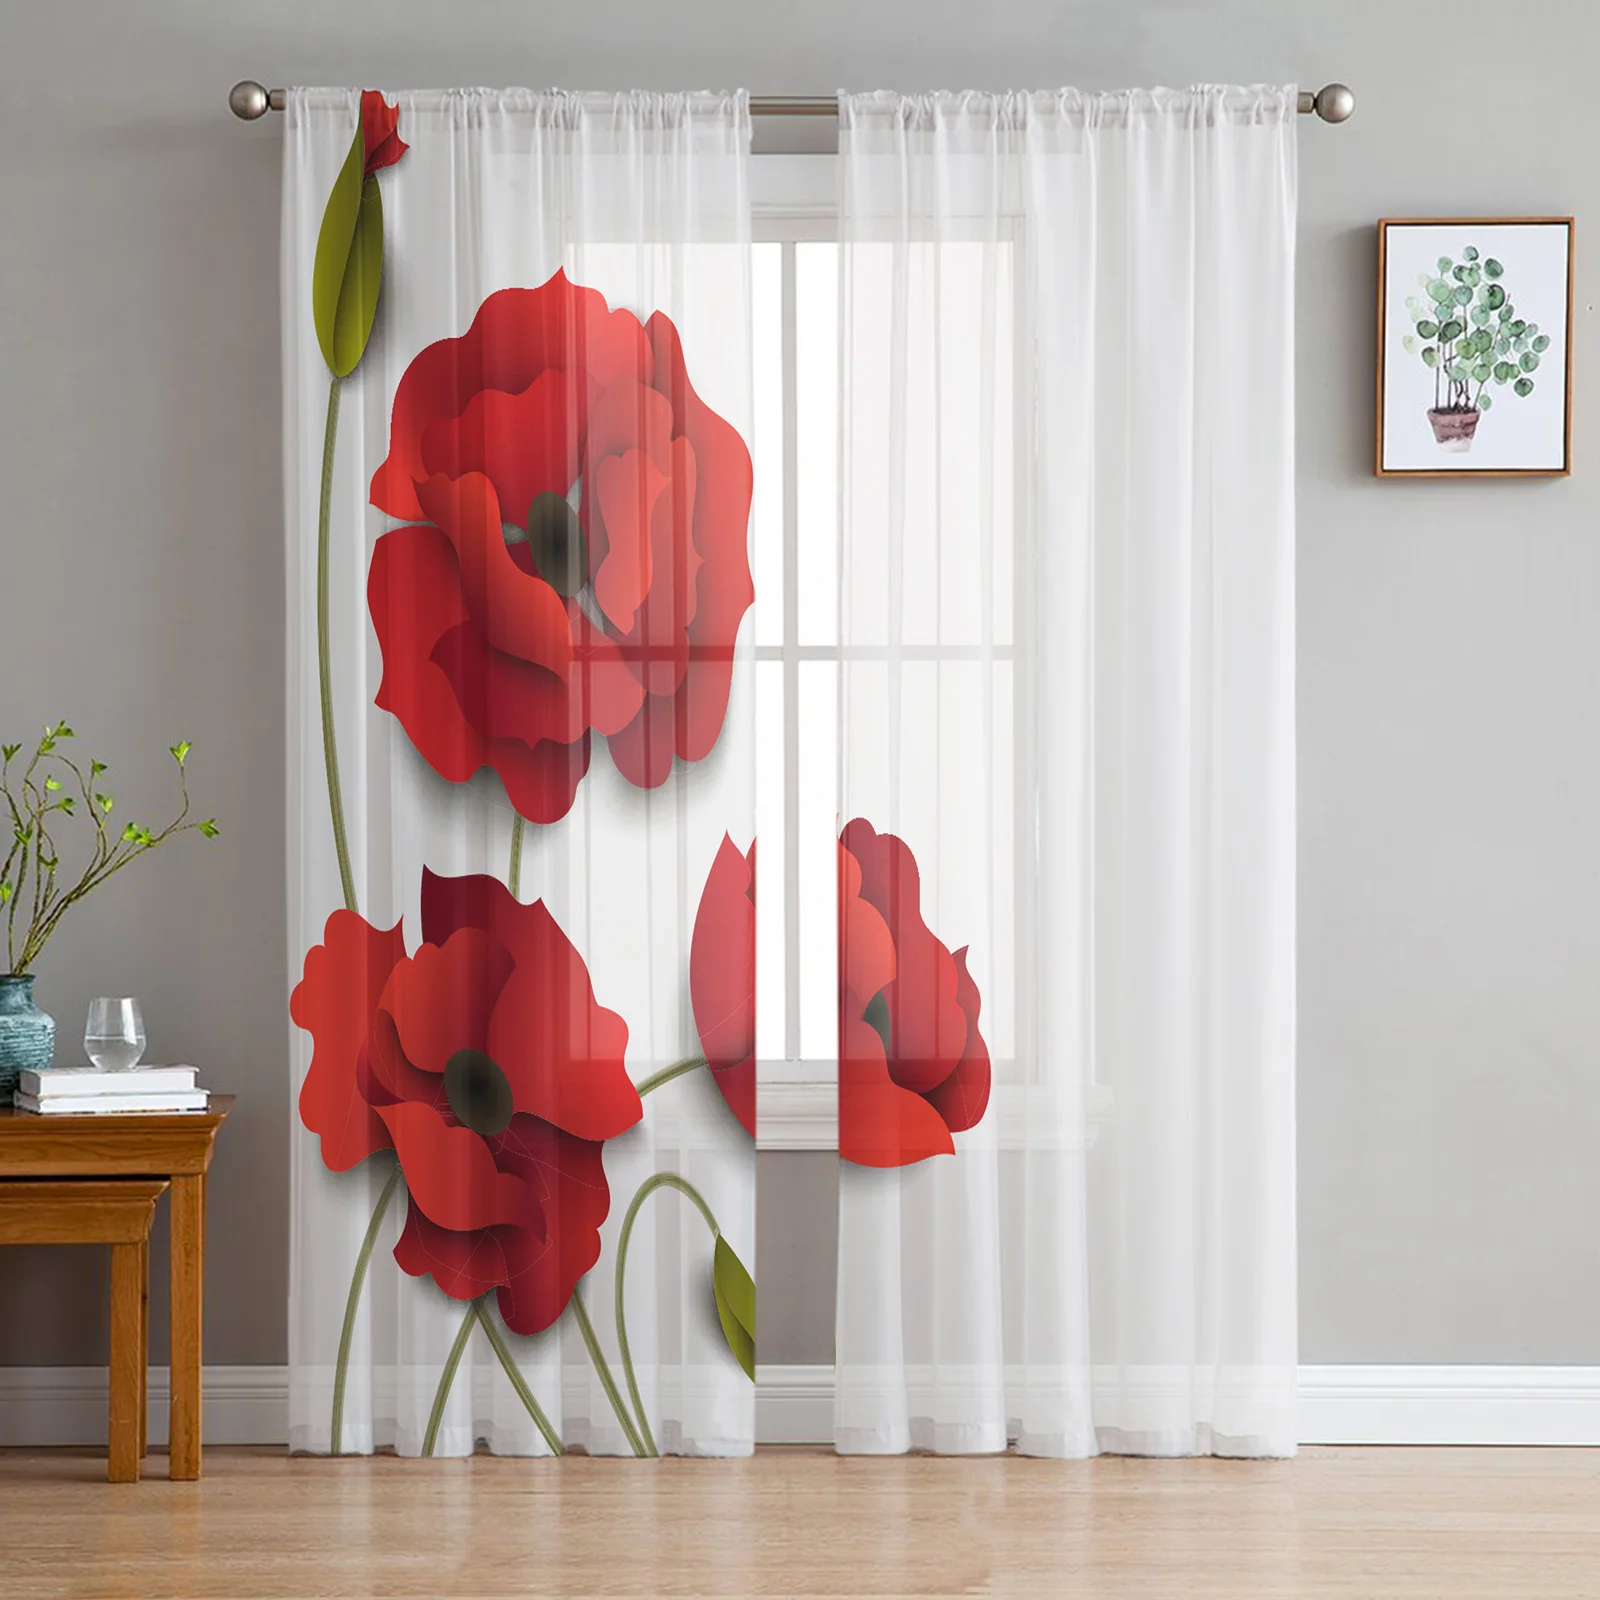 

Red Poppy Flower Sheer Curtain for Living Room Voile for Window Blinds Bedroom Tulle Drape Kitchen Cortinas Hall Curtains